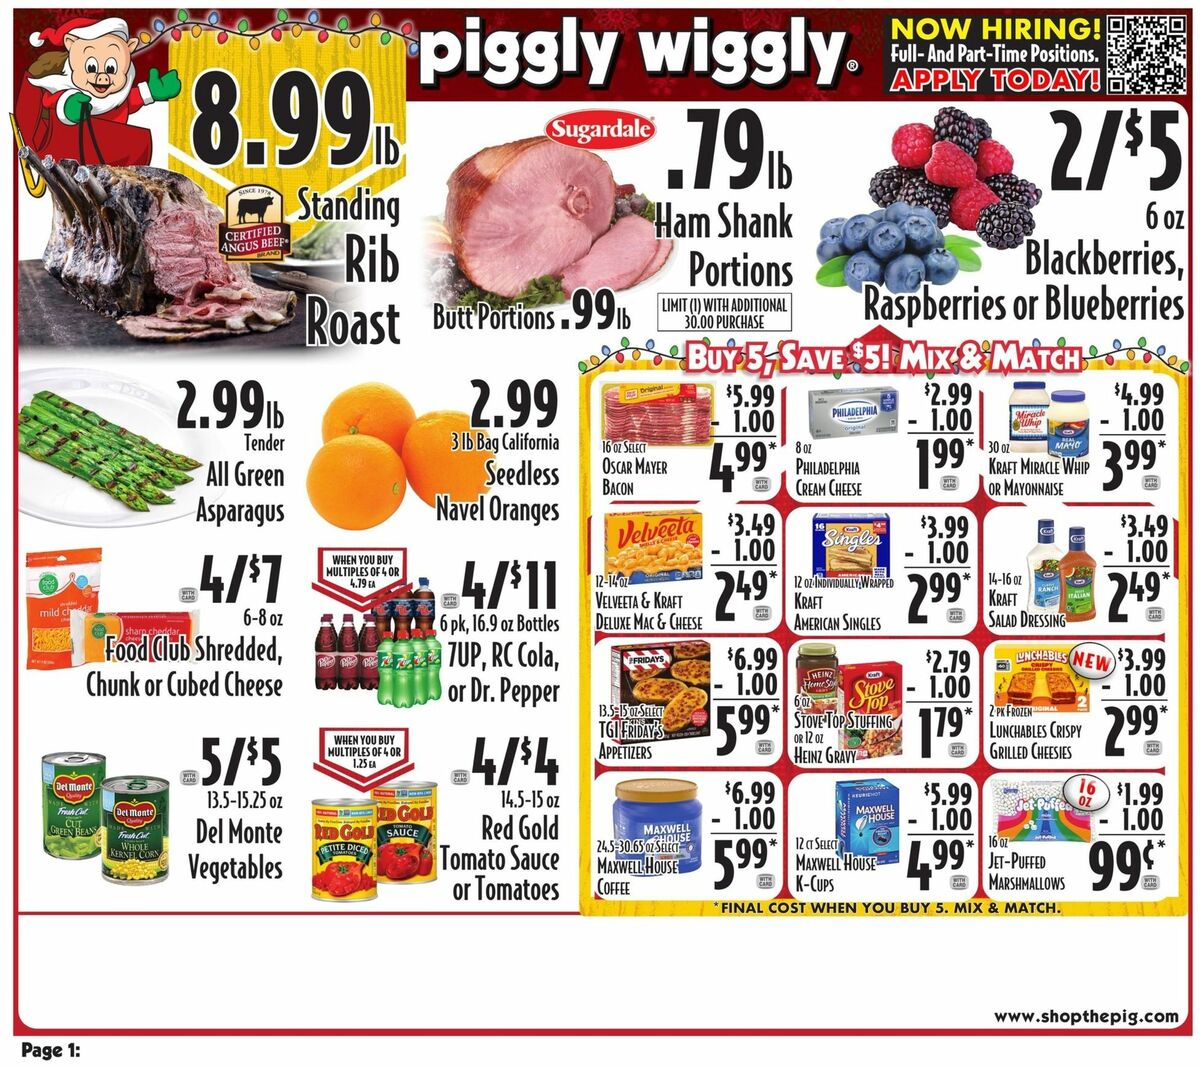 Piggly Wiggly Weekly Ad from December 13